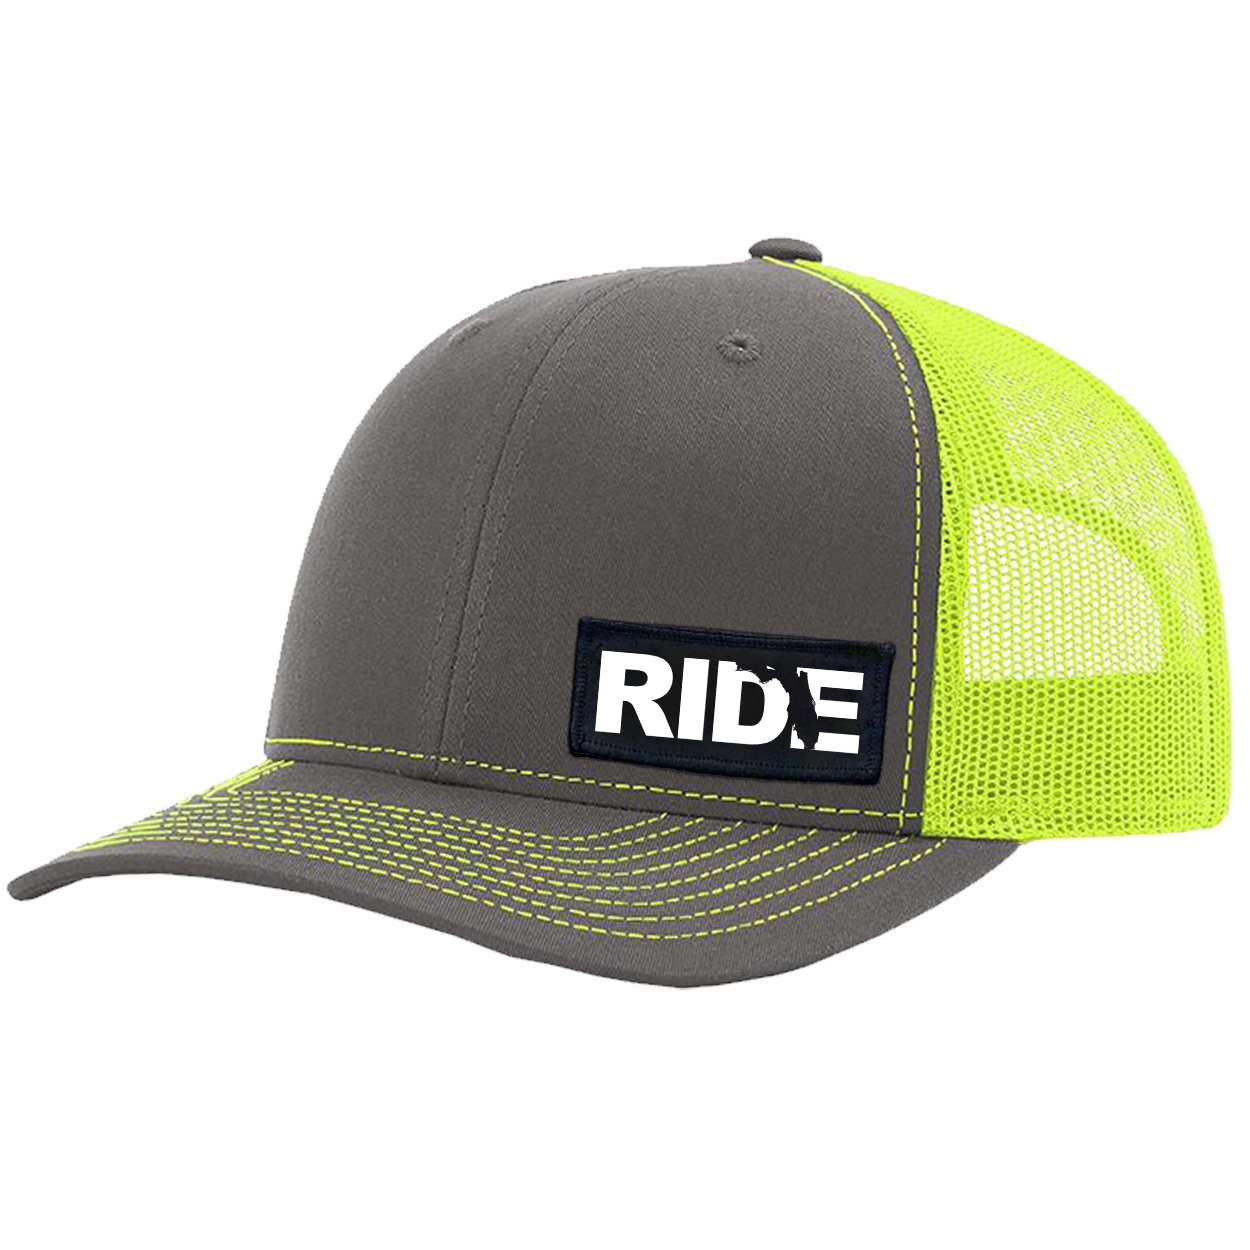 Ride Florida Night Out Woven Patch Snapback Trucker Hat Charcoal/Neon Yellow (White Logo)